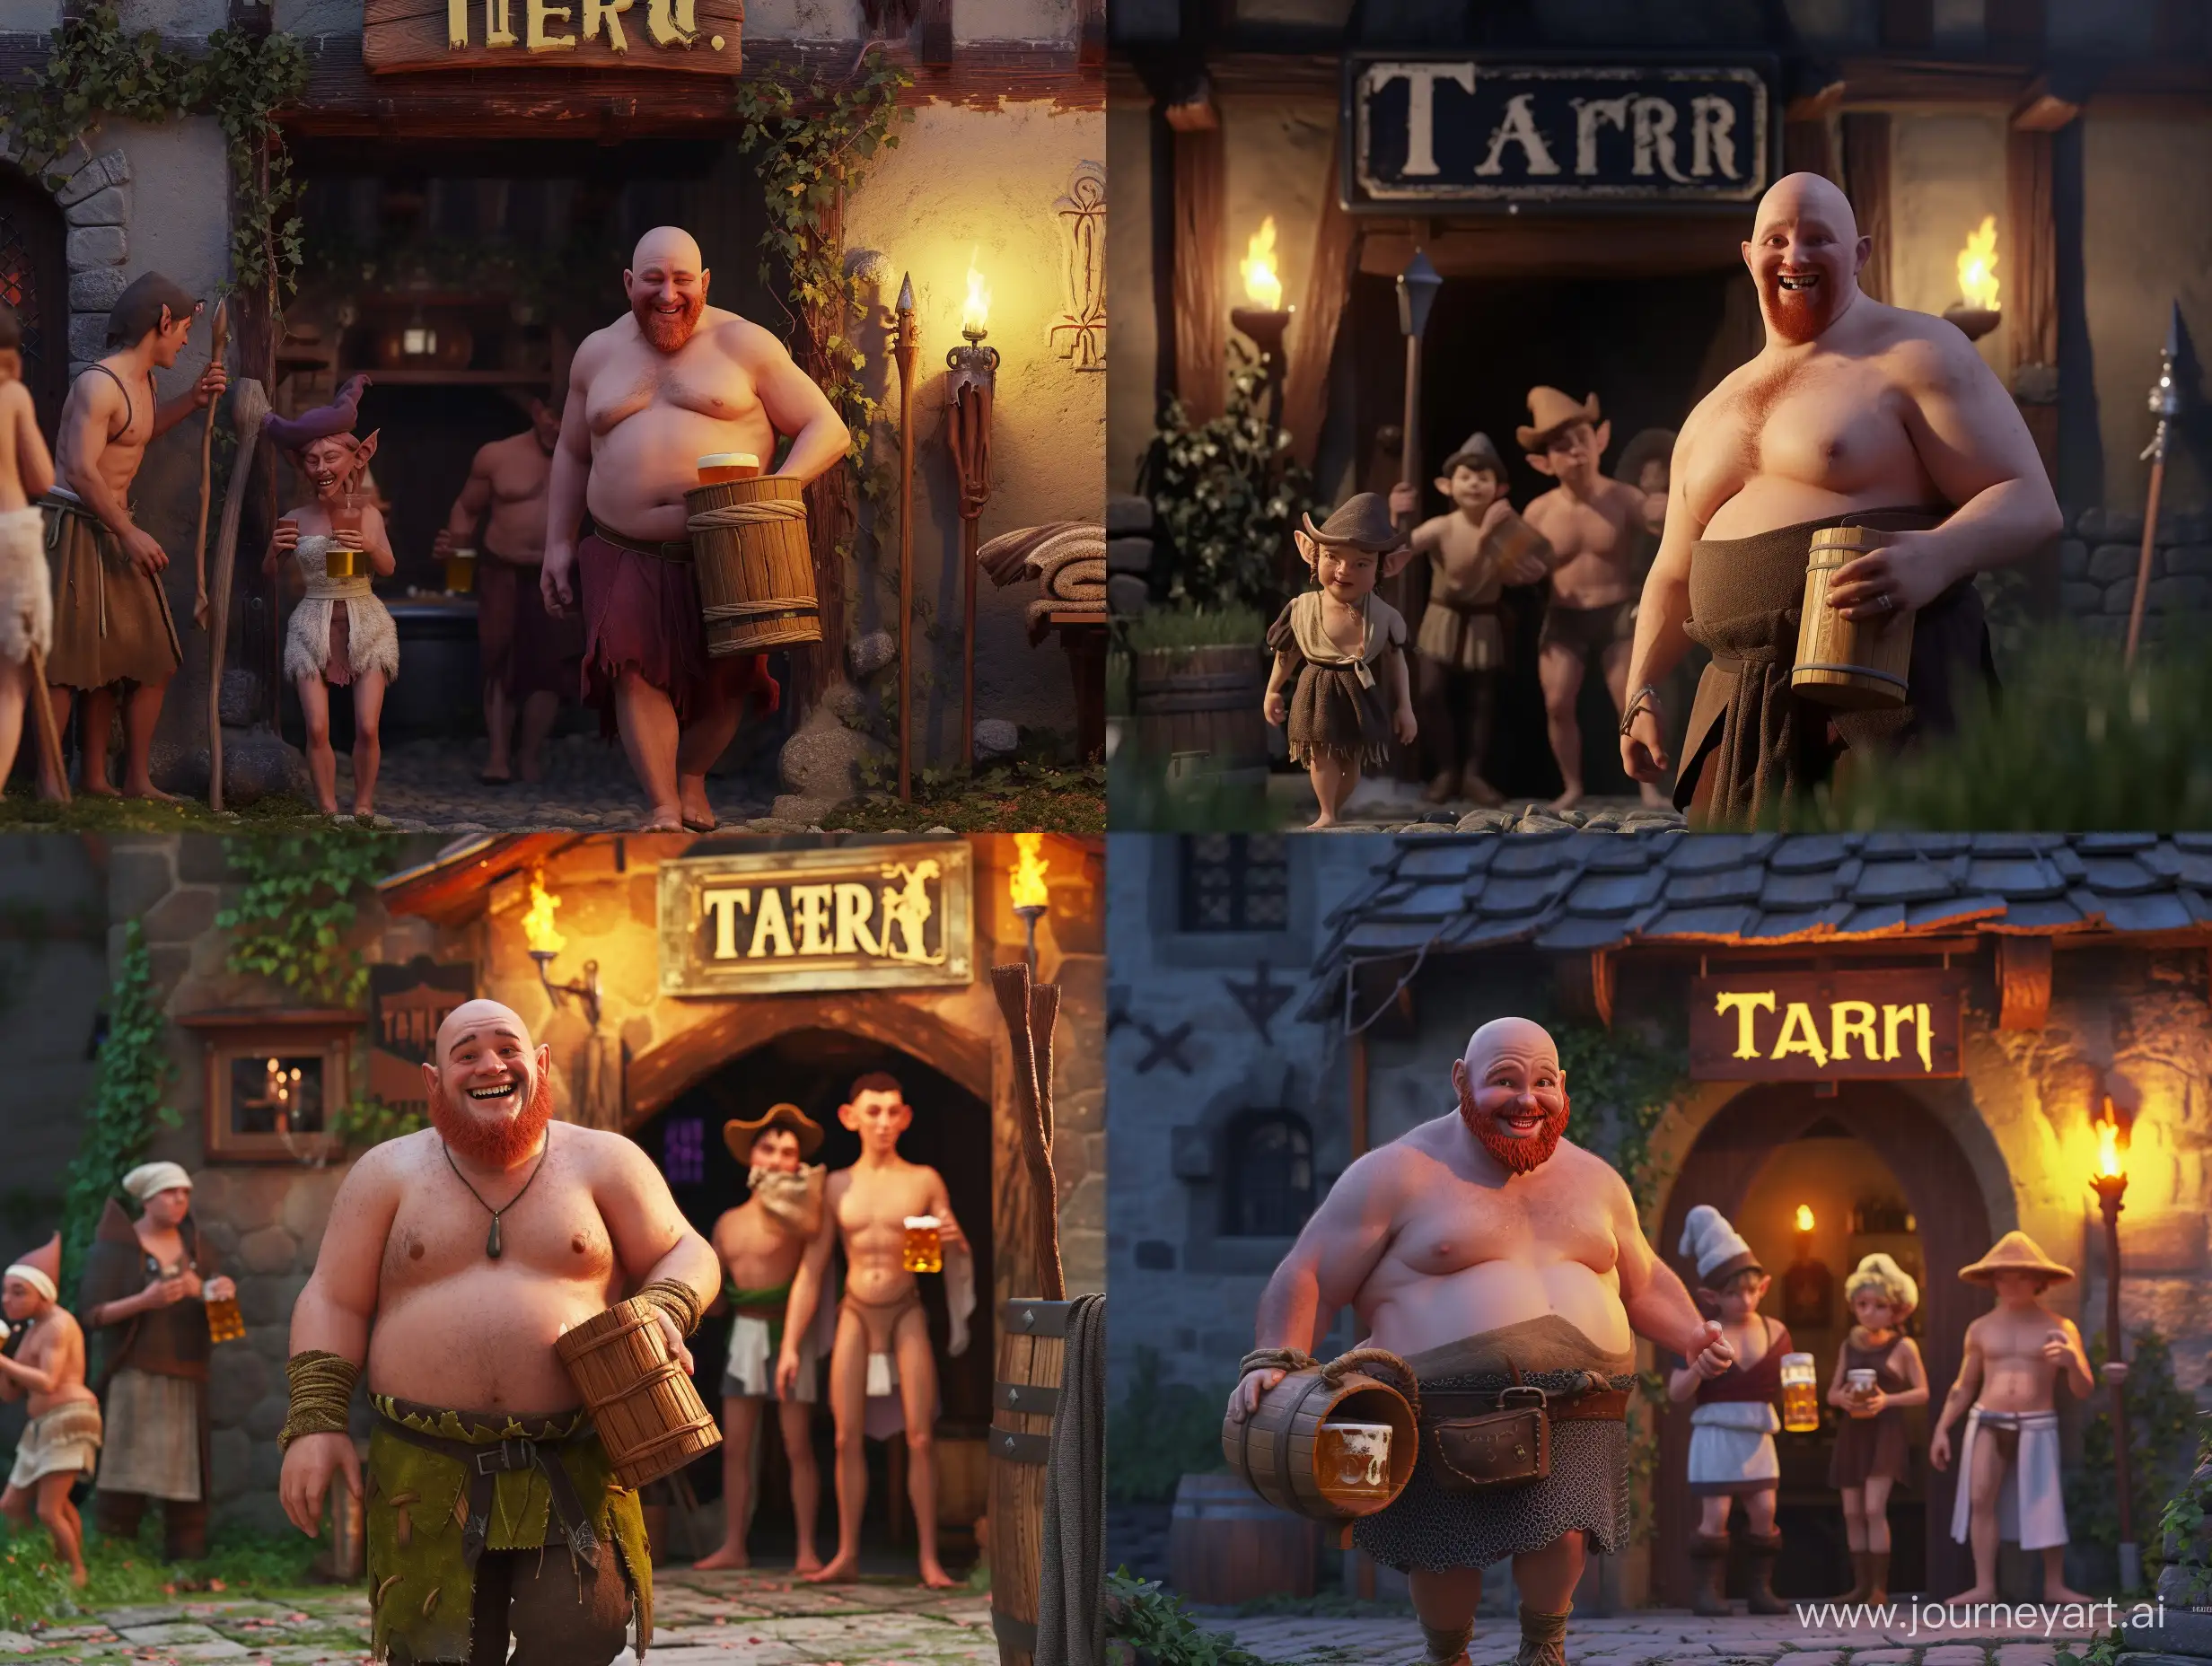 Medieval-Tavern-Revelry-Bald-Mans-Cheerful-Libation-and-Whimsical-Bathhouse-Wizards